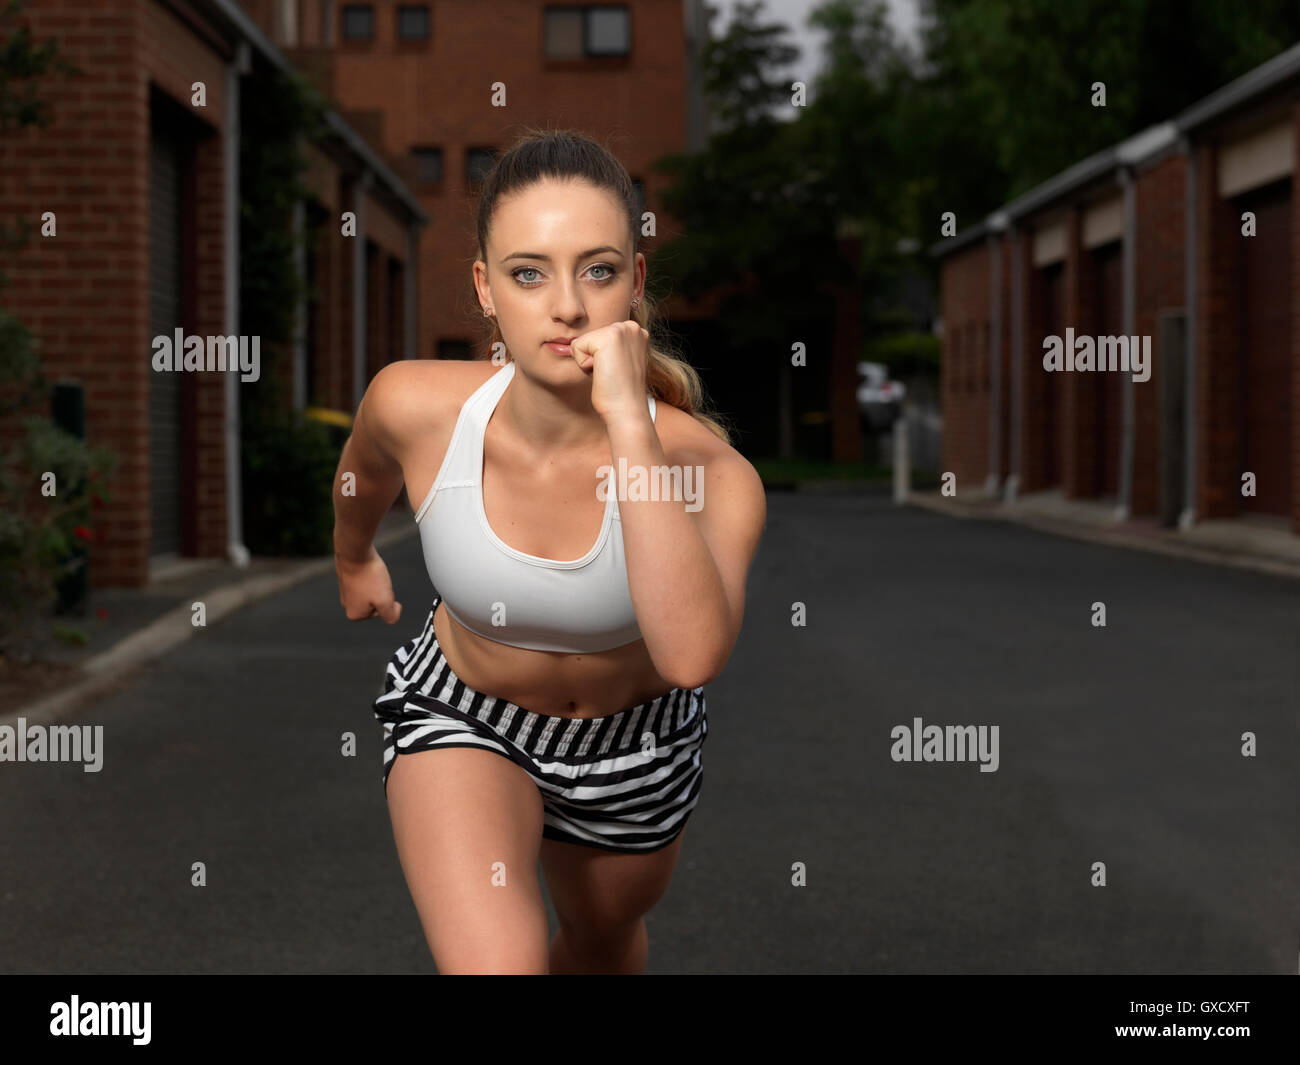 Portrait of young female runner poised to run on urban street Stock Photo